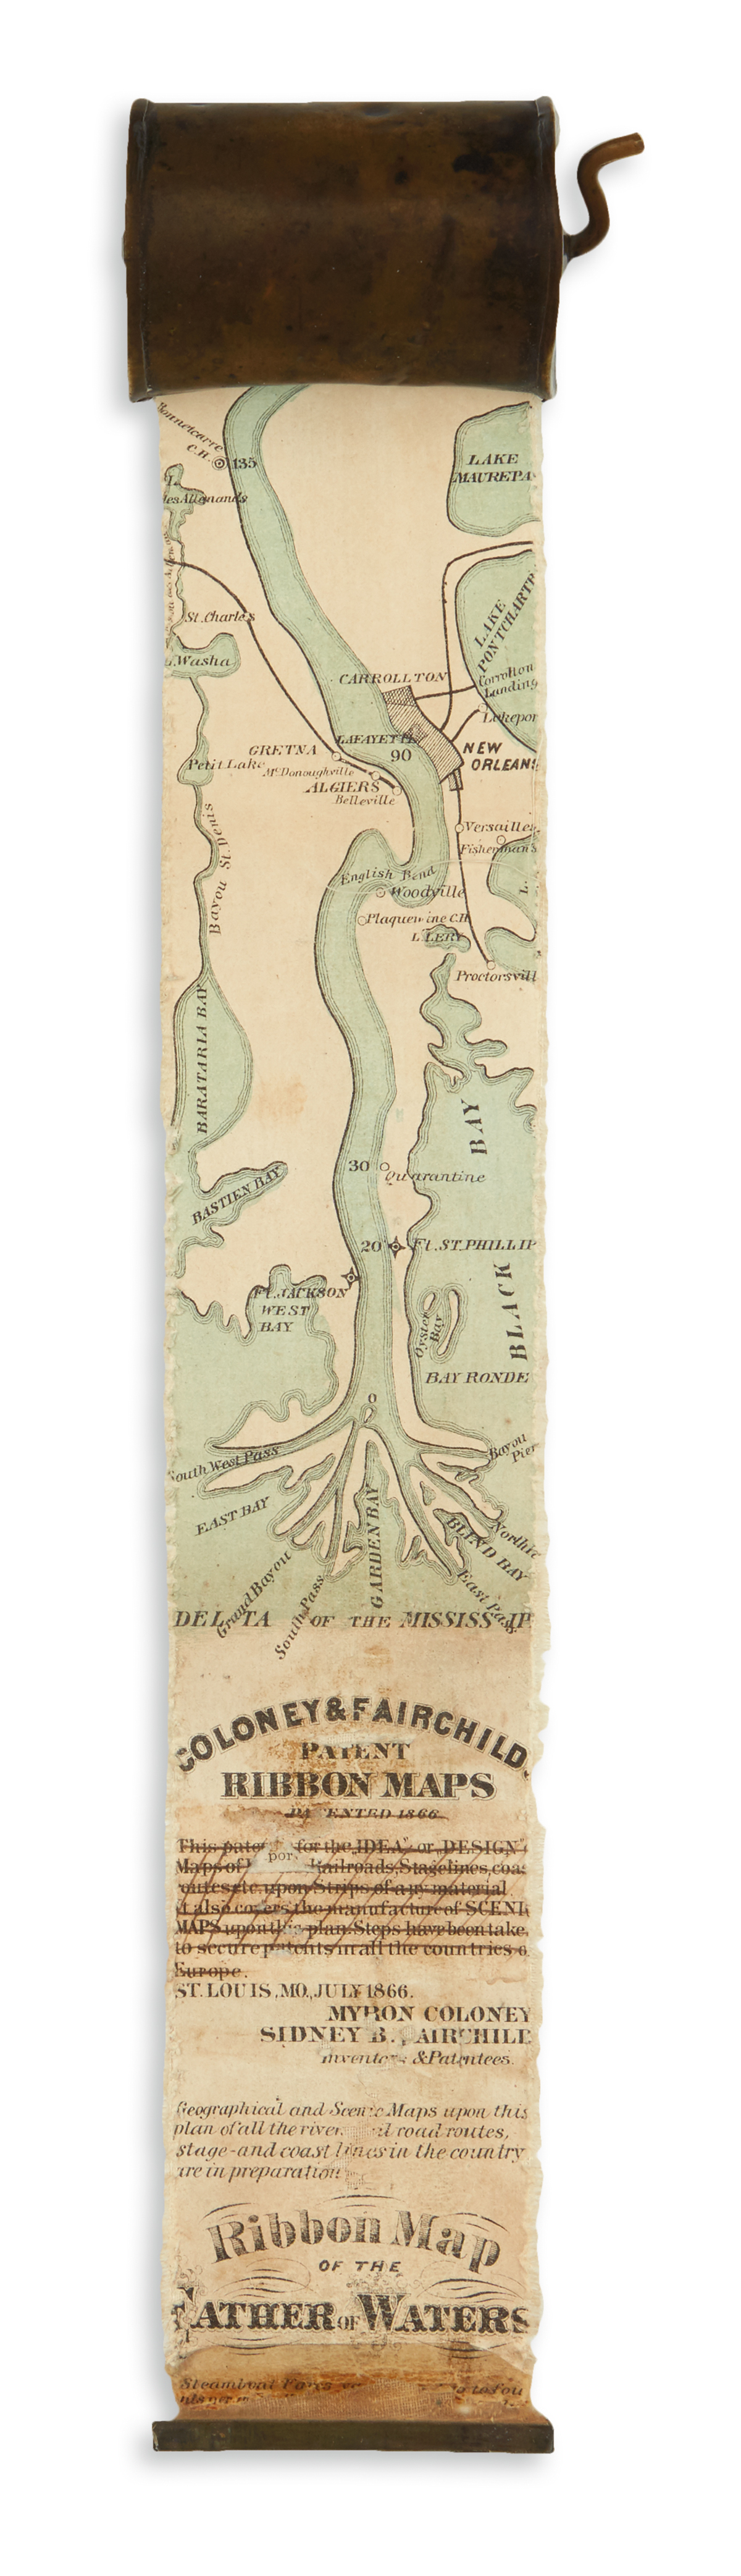 (MISSISSIPPI RIVER). Coloney, Myron; and Fairchild, Sidney B. Ribbon Map of the Father of Waters.